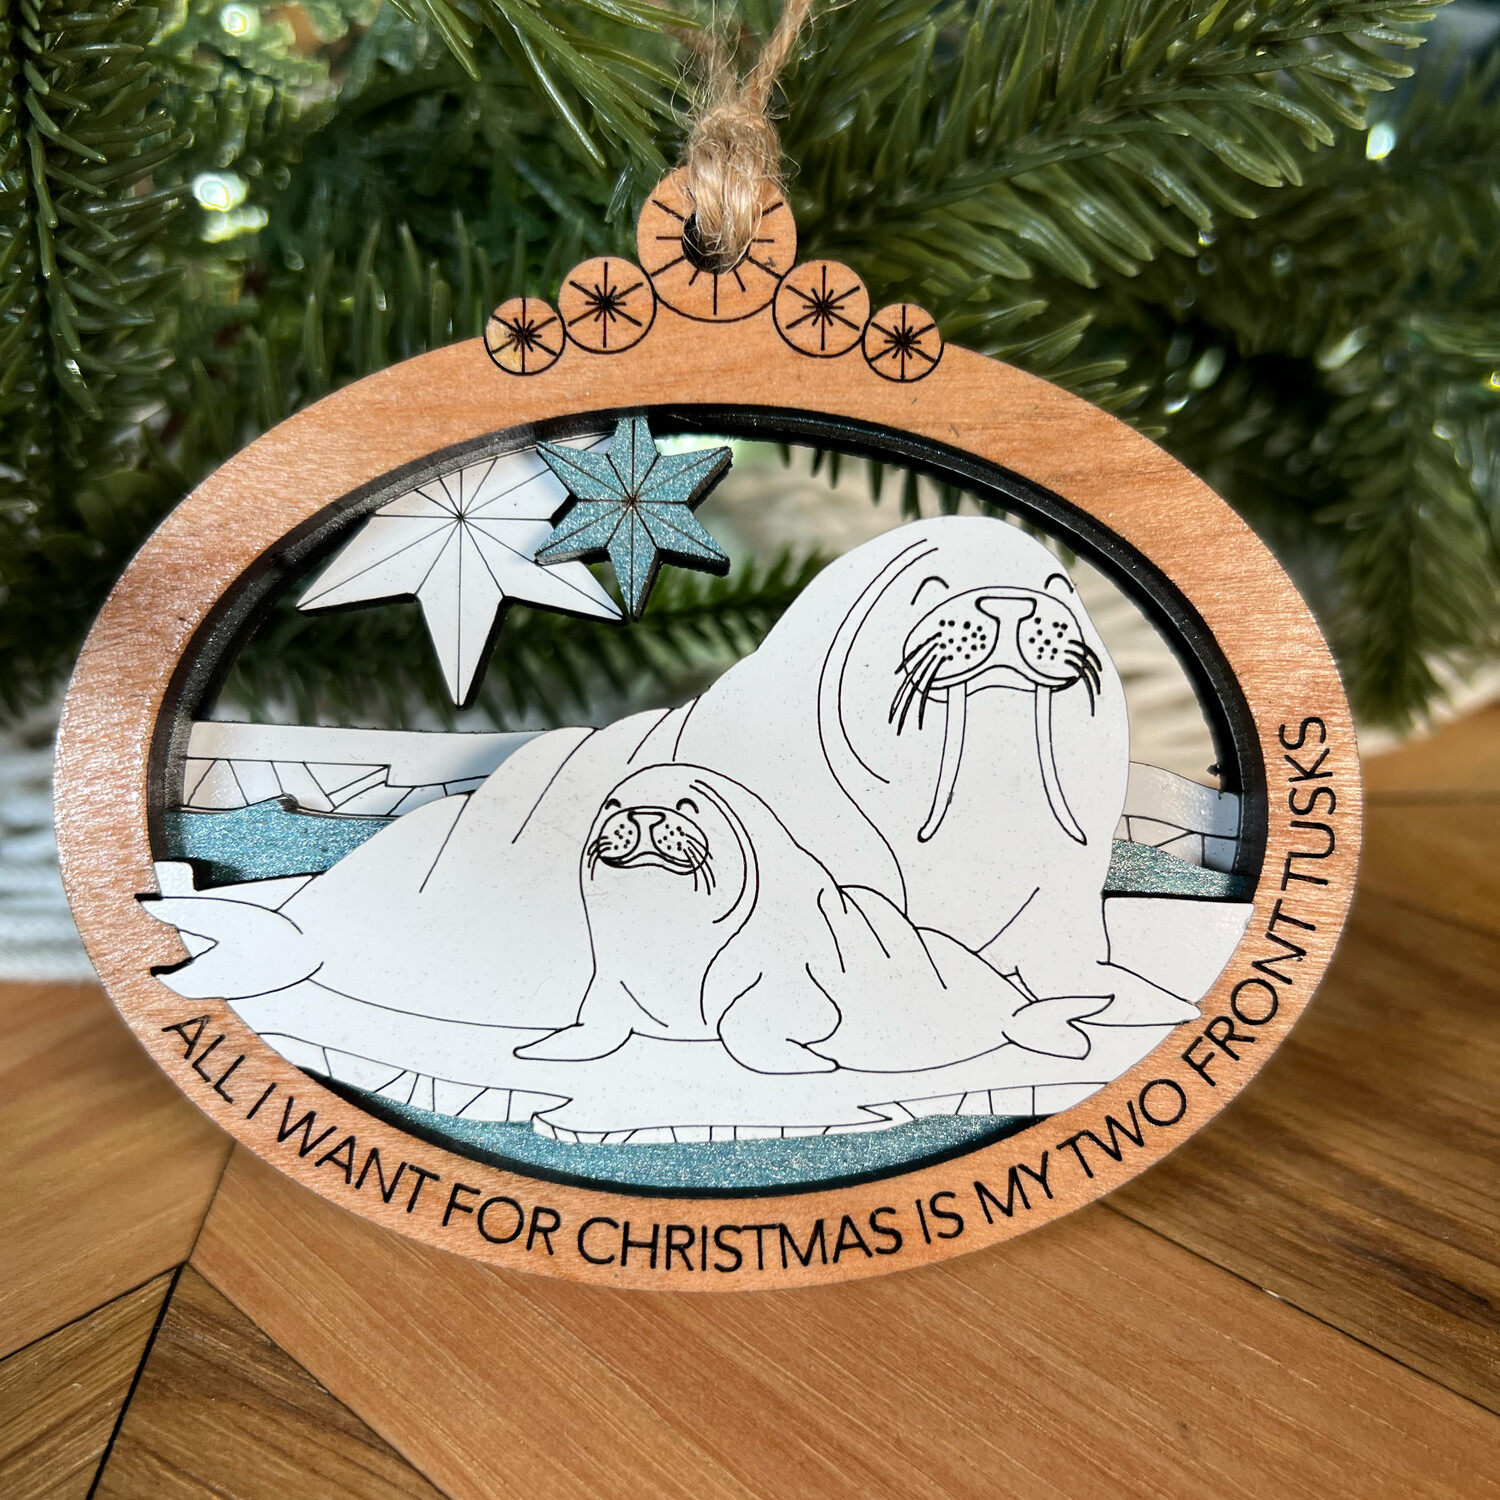 All I Want for Christmas is My Two Front Tusks Ornament